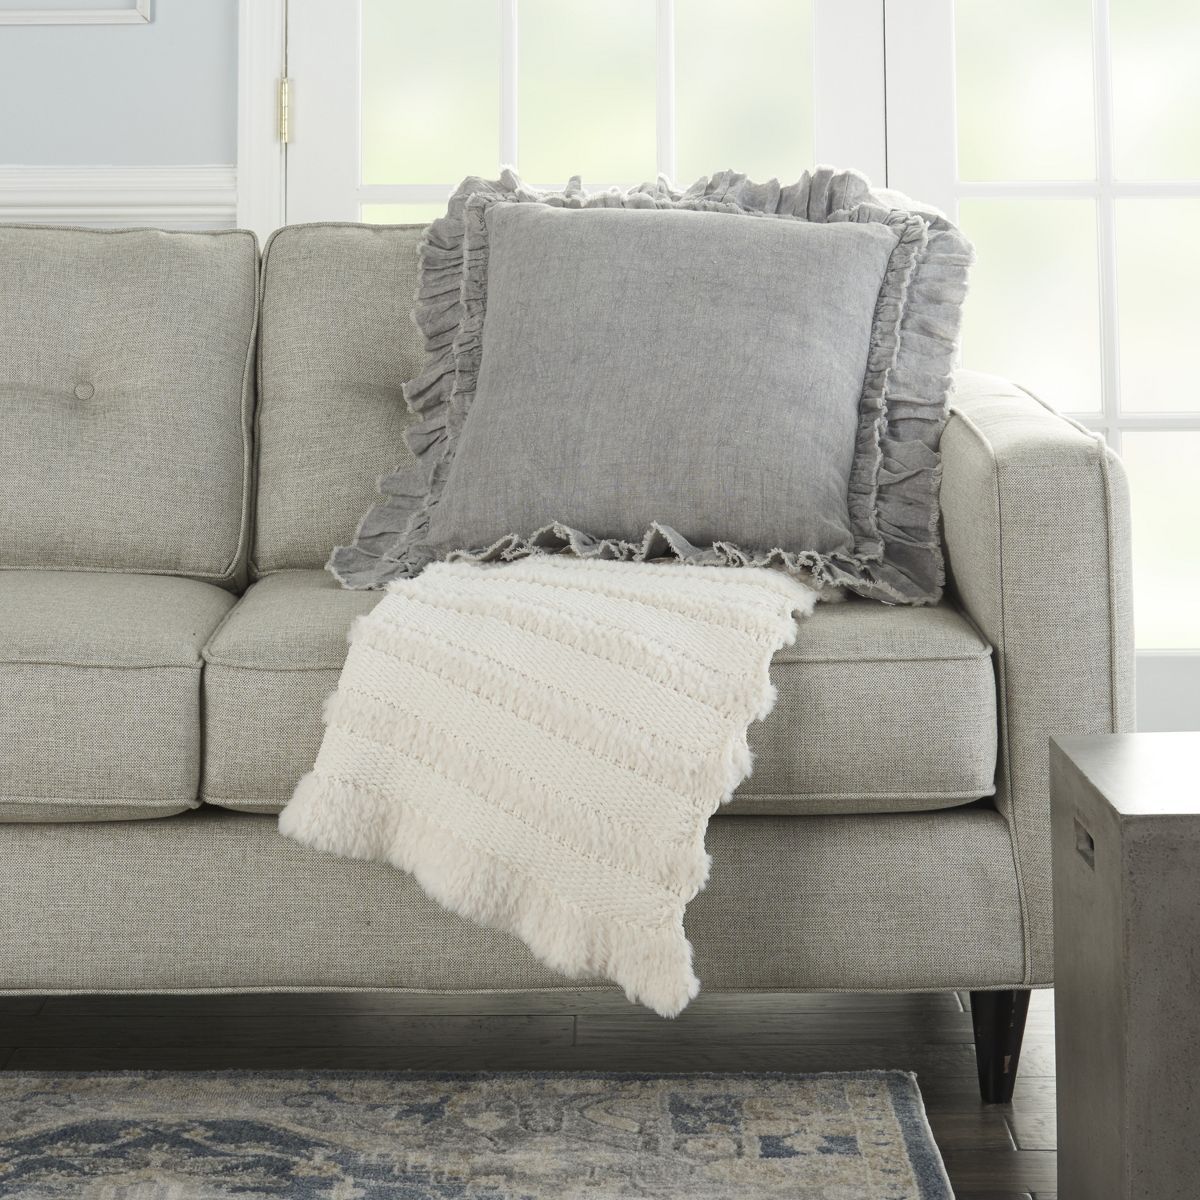 Mina Victory Life Styles Linen Frilled Border Throw Pillow | Target